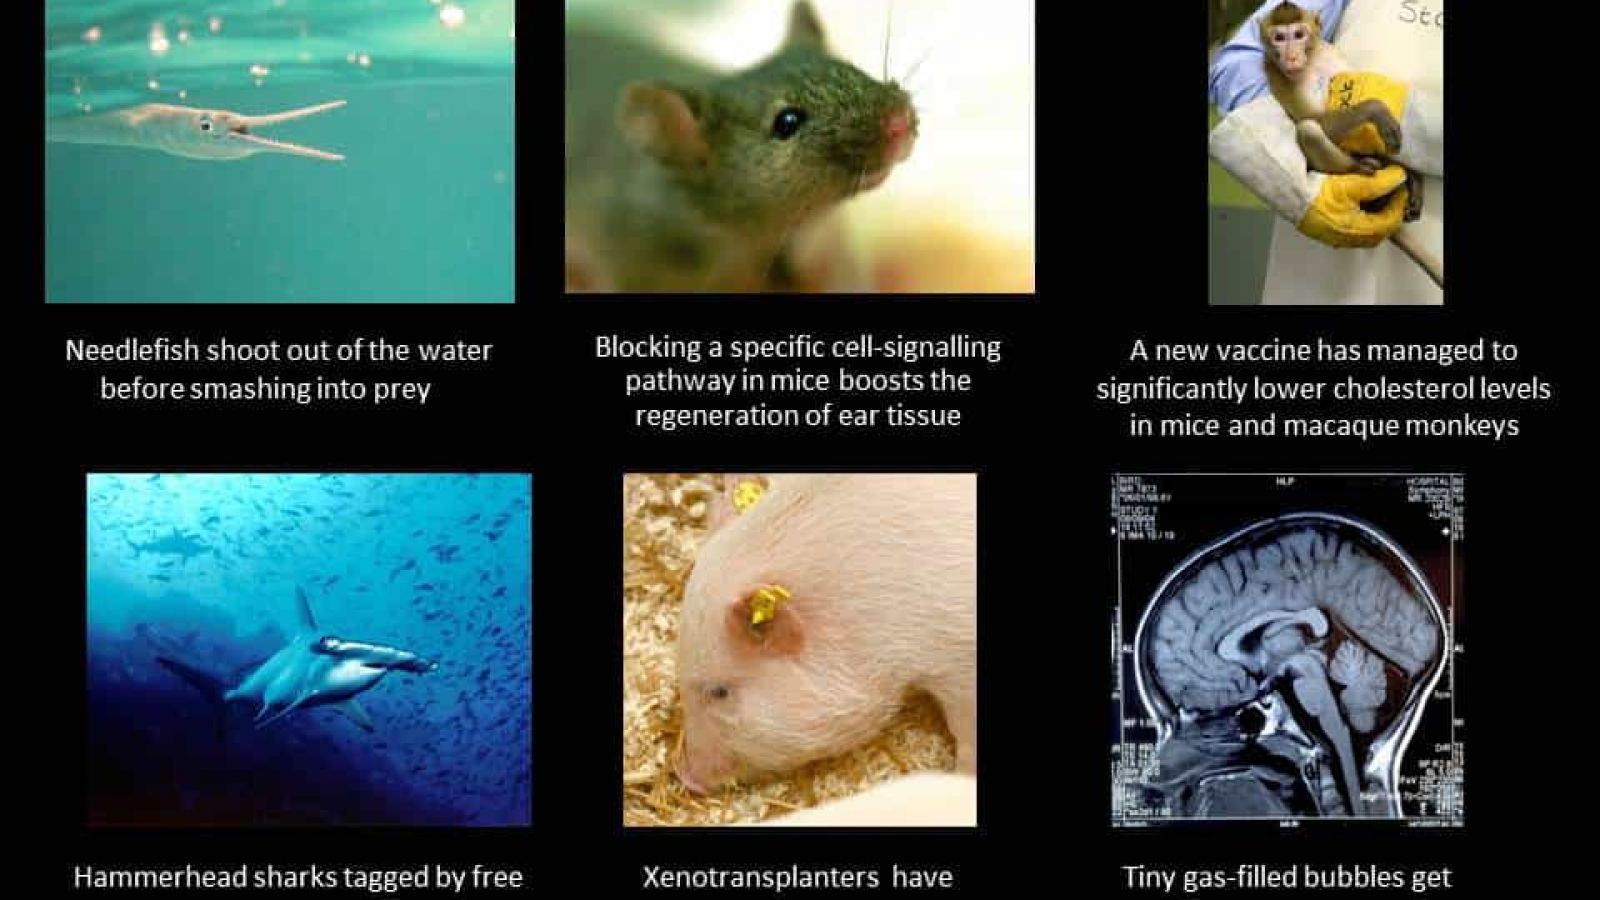 This week in animal research 13/11/15